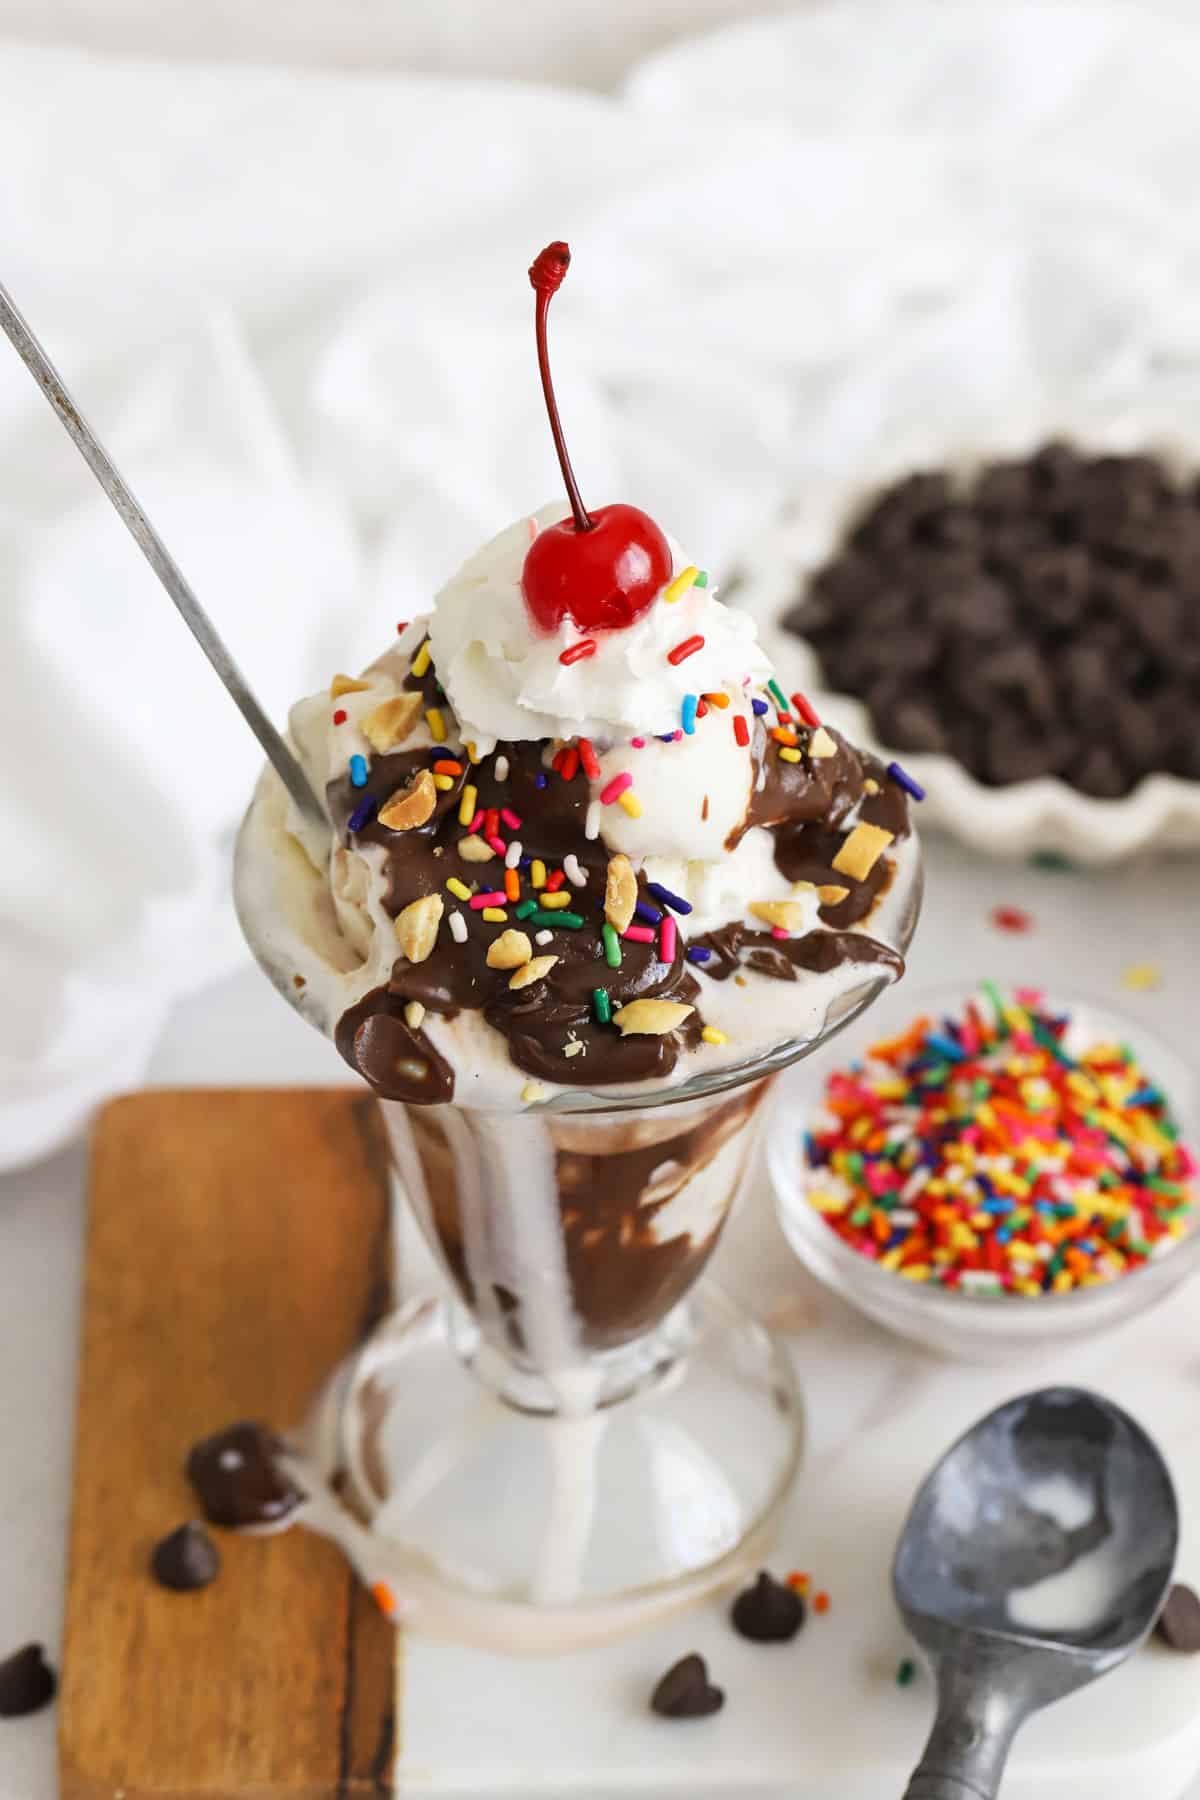 Learn how to make a classic hot fudge sundae! This classic ice cream dessert is a total crowd pleaser (especially with our homemade hot fudge!). Beyond the old-fashioned hot fudge sundae recipe, get TONS of delicious ideas for an ice cream sundae bar, famous ice cream sundae variations, and more. 